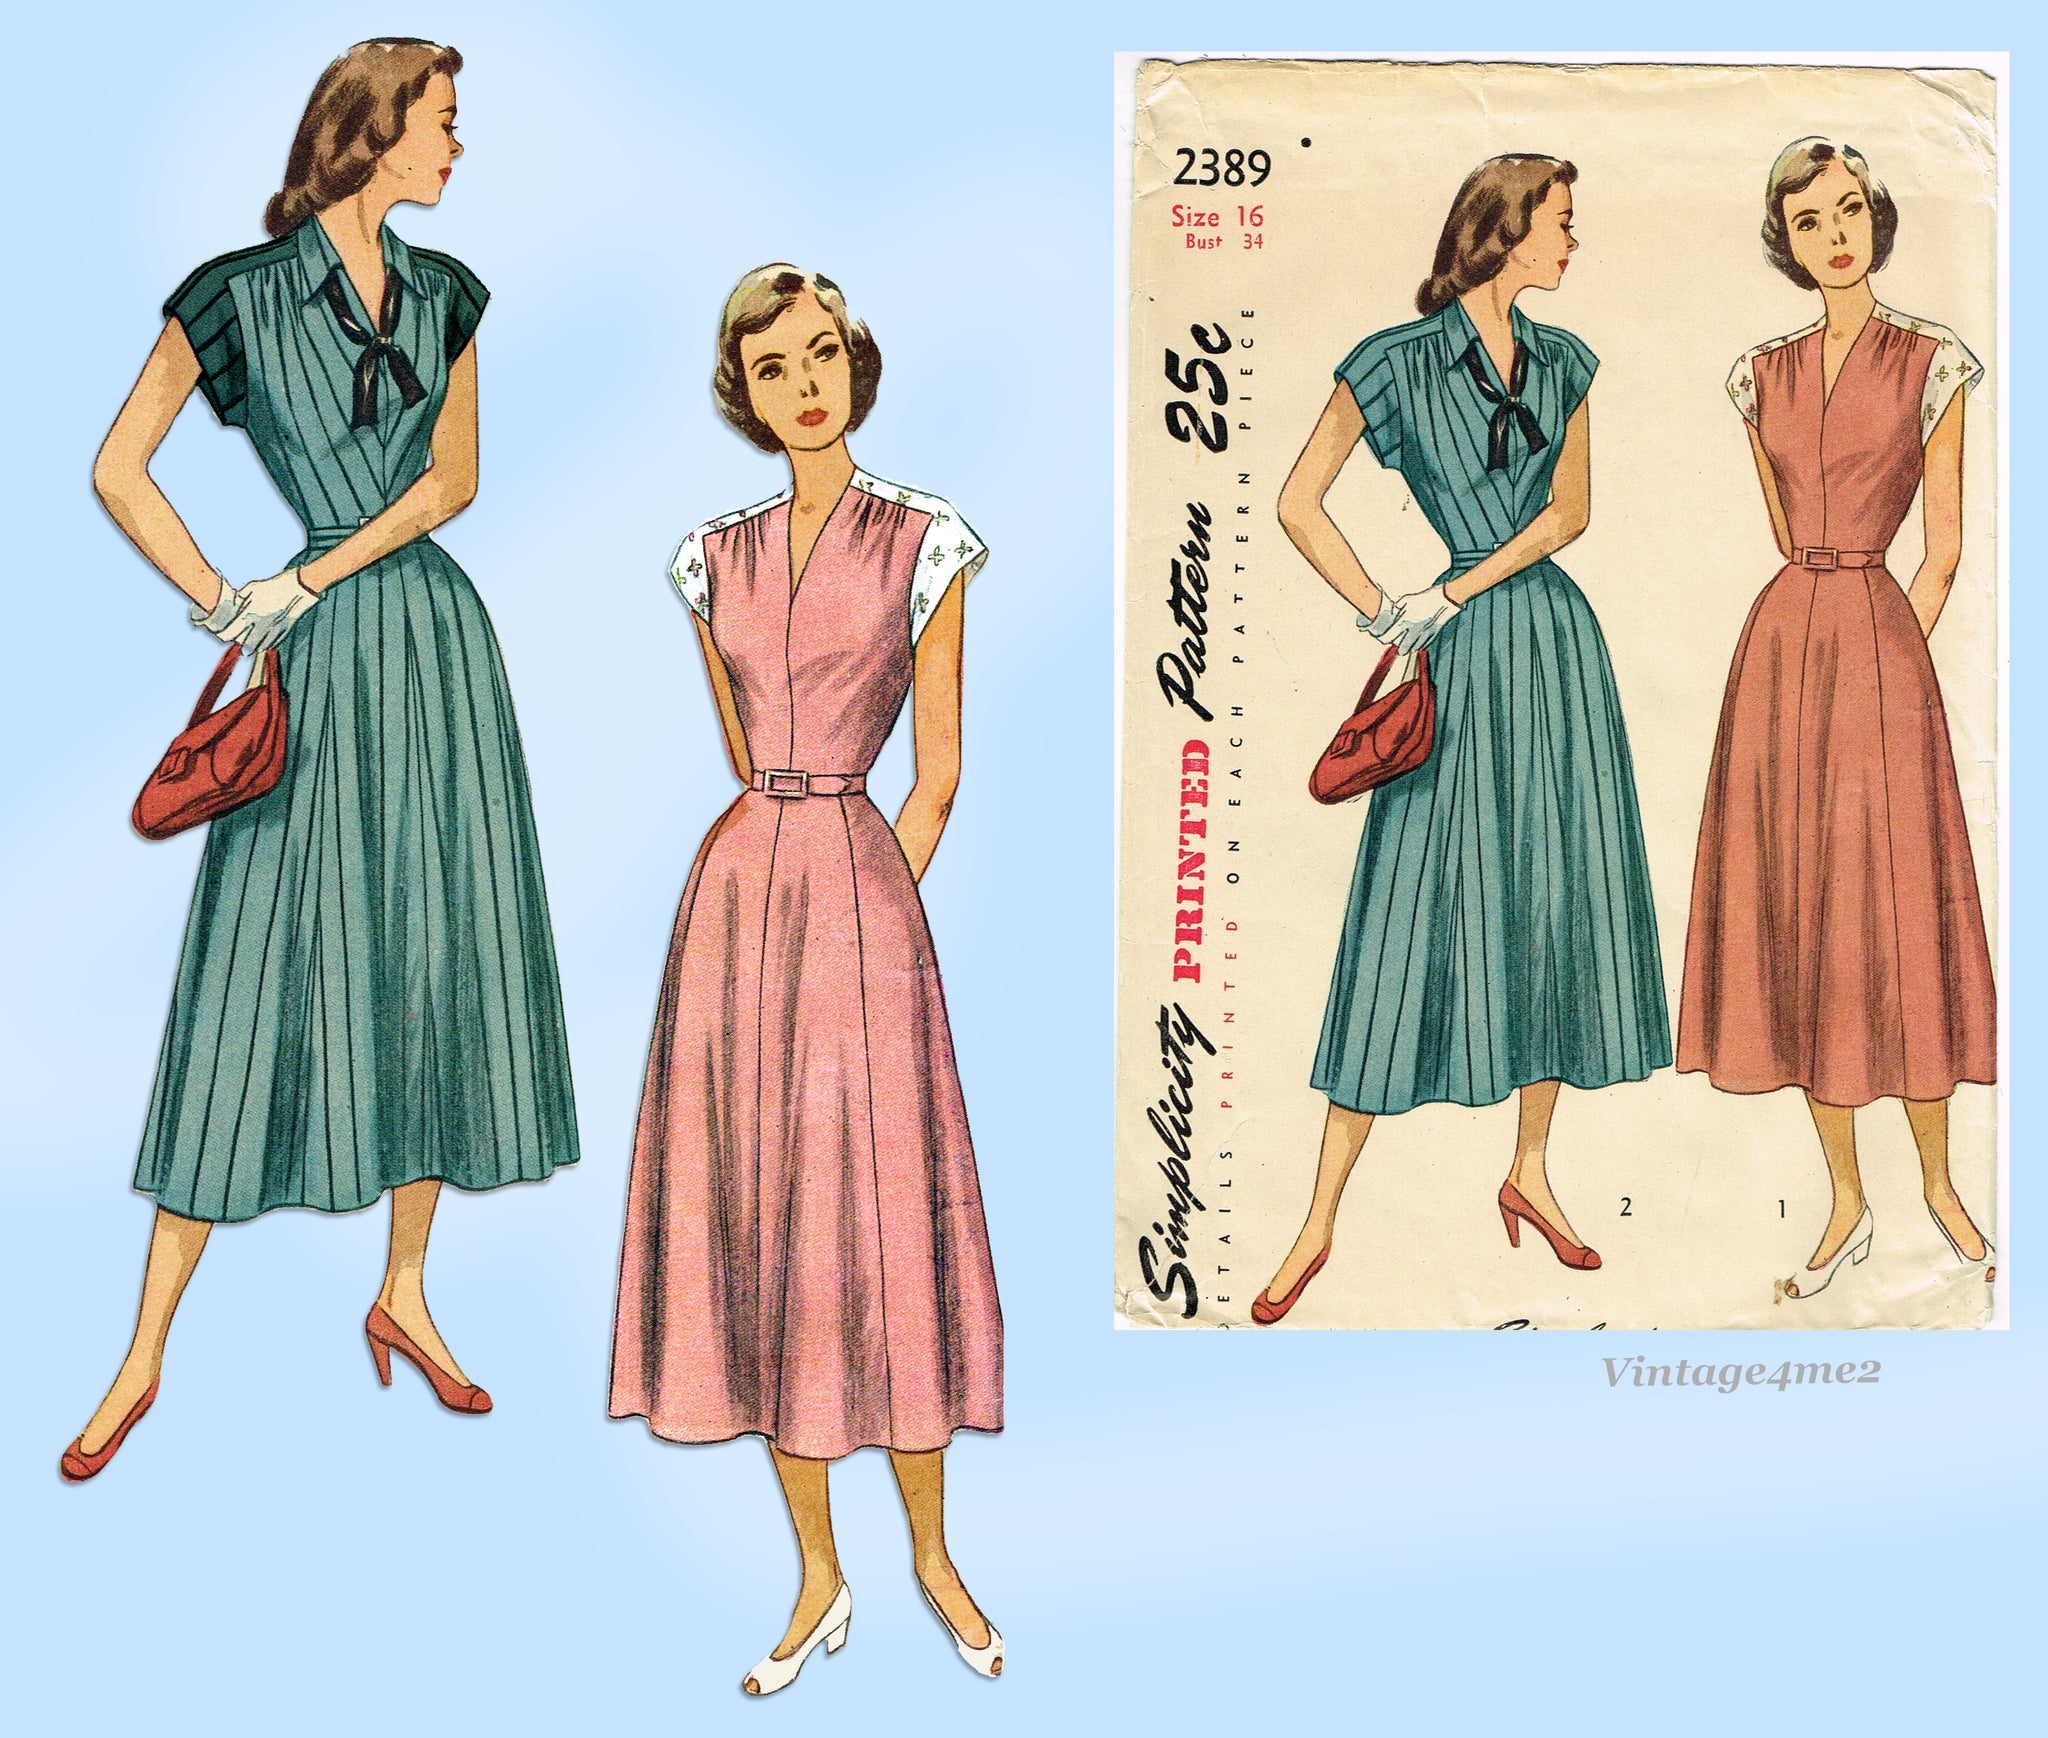 Simplicity Simplicity Pattern 8249 Misses' Vintage 1940's Gown and Dress